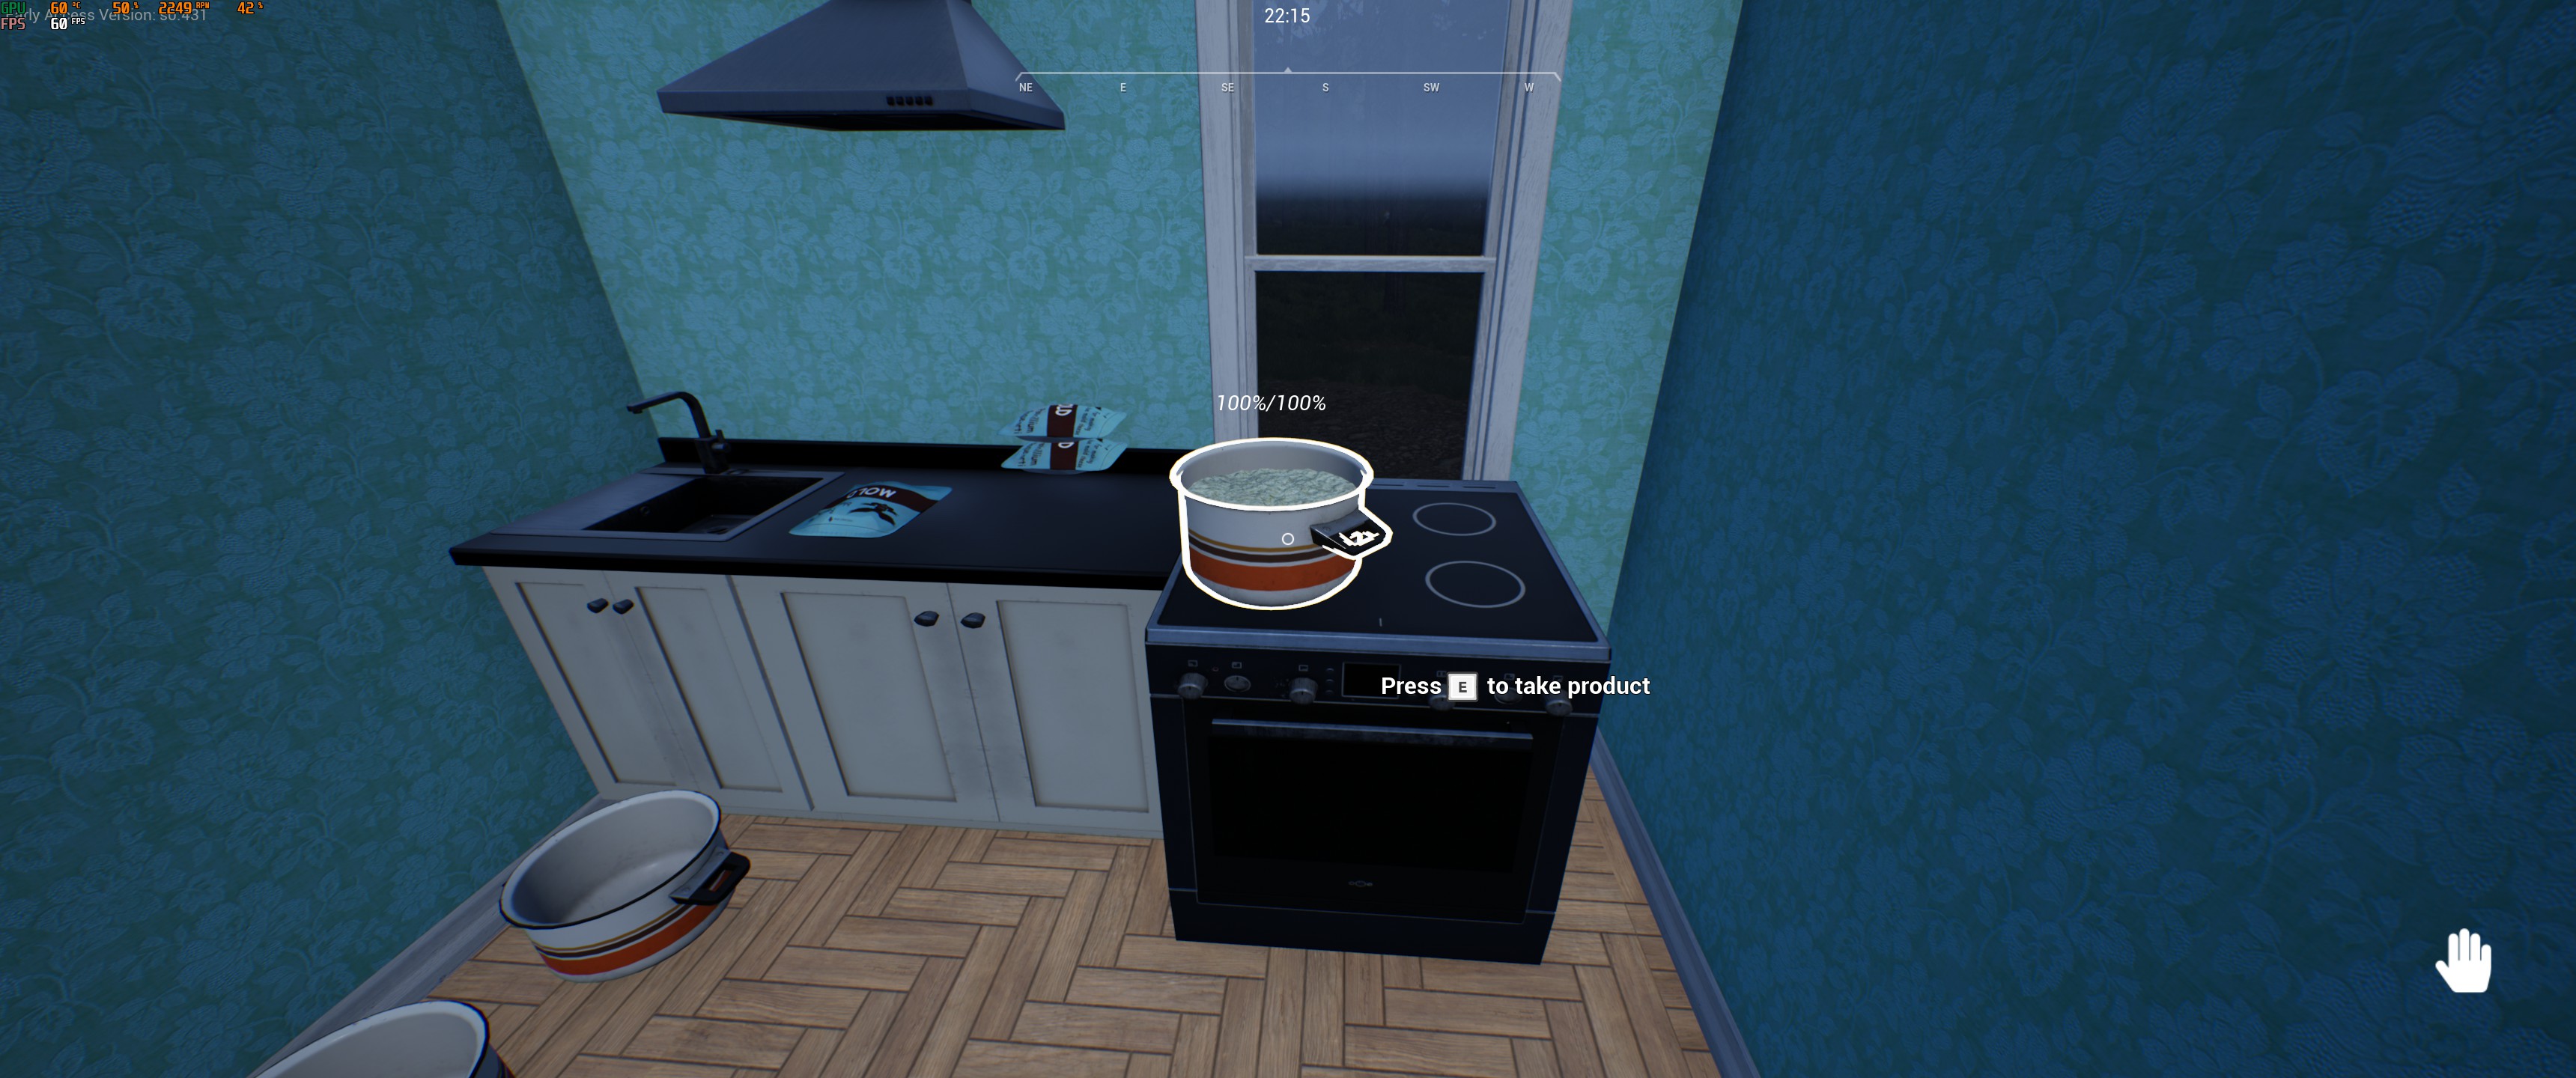 Ranch Simulator Cooking Tips for Beginners Guide